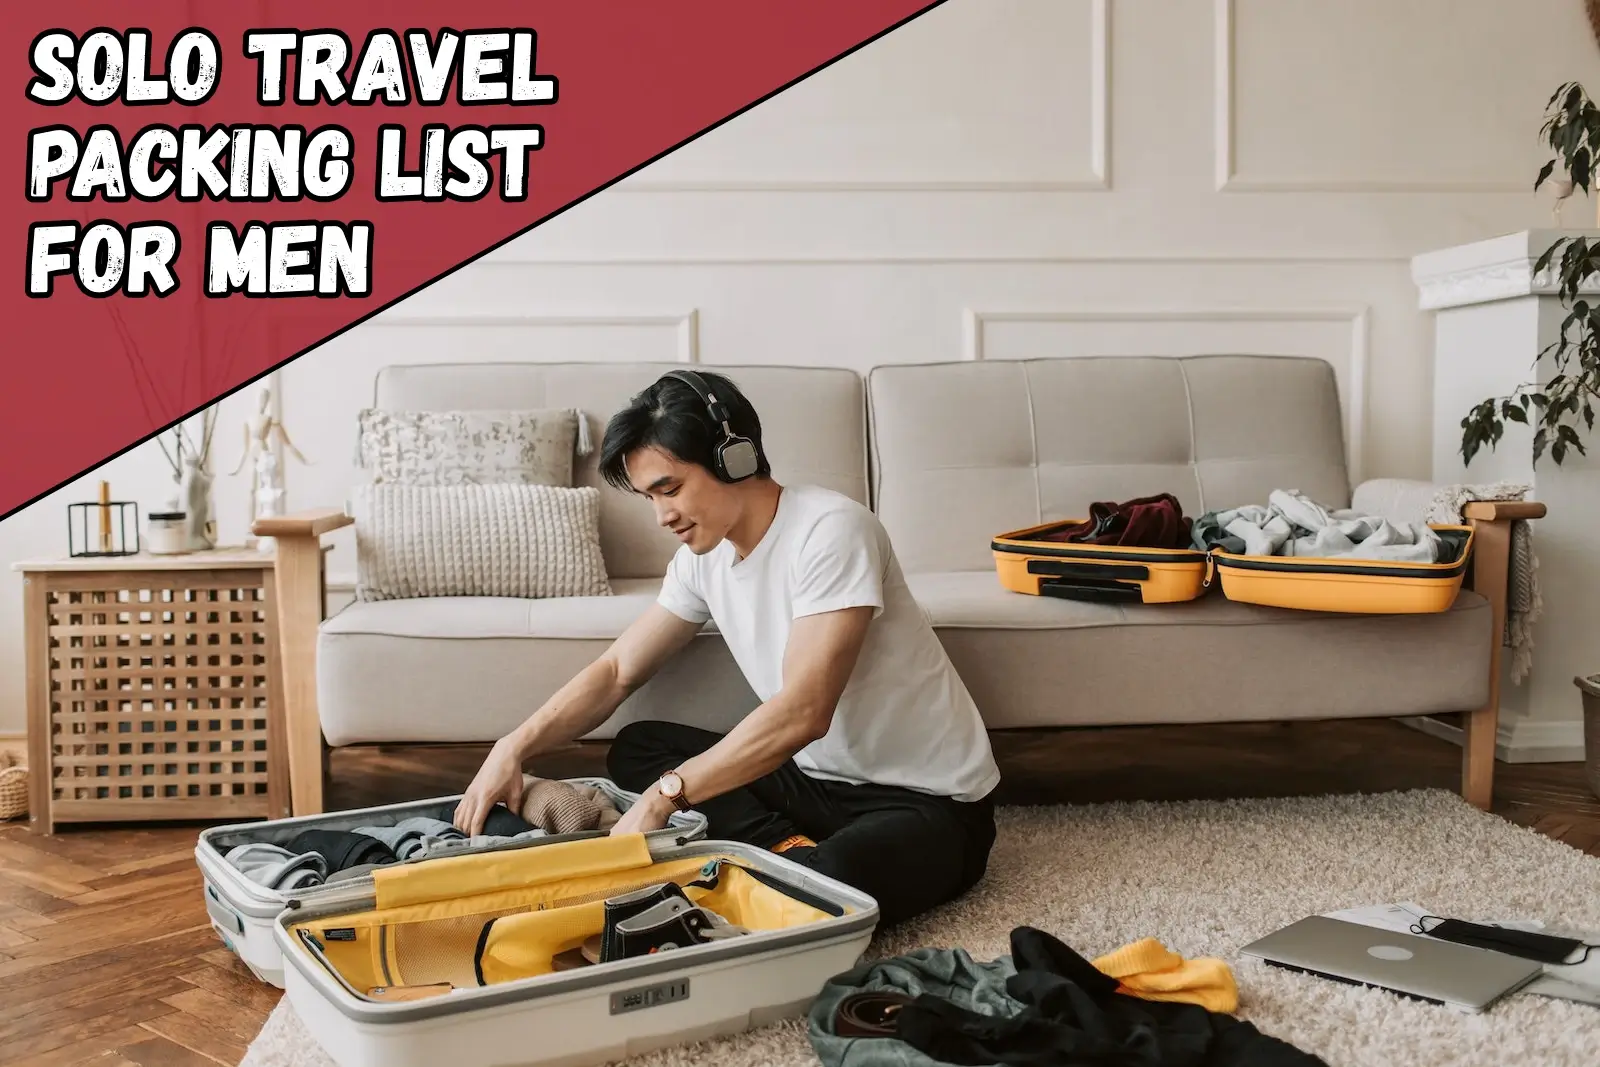 Solo travel packing list male. Man packing suitcase.